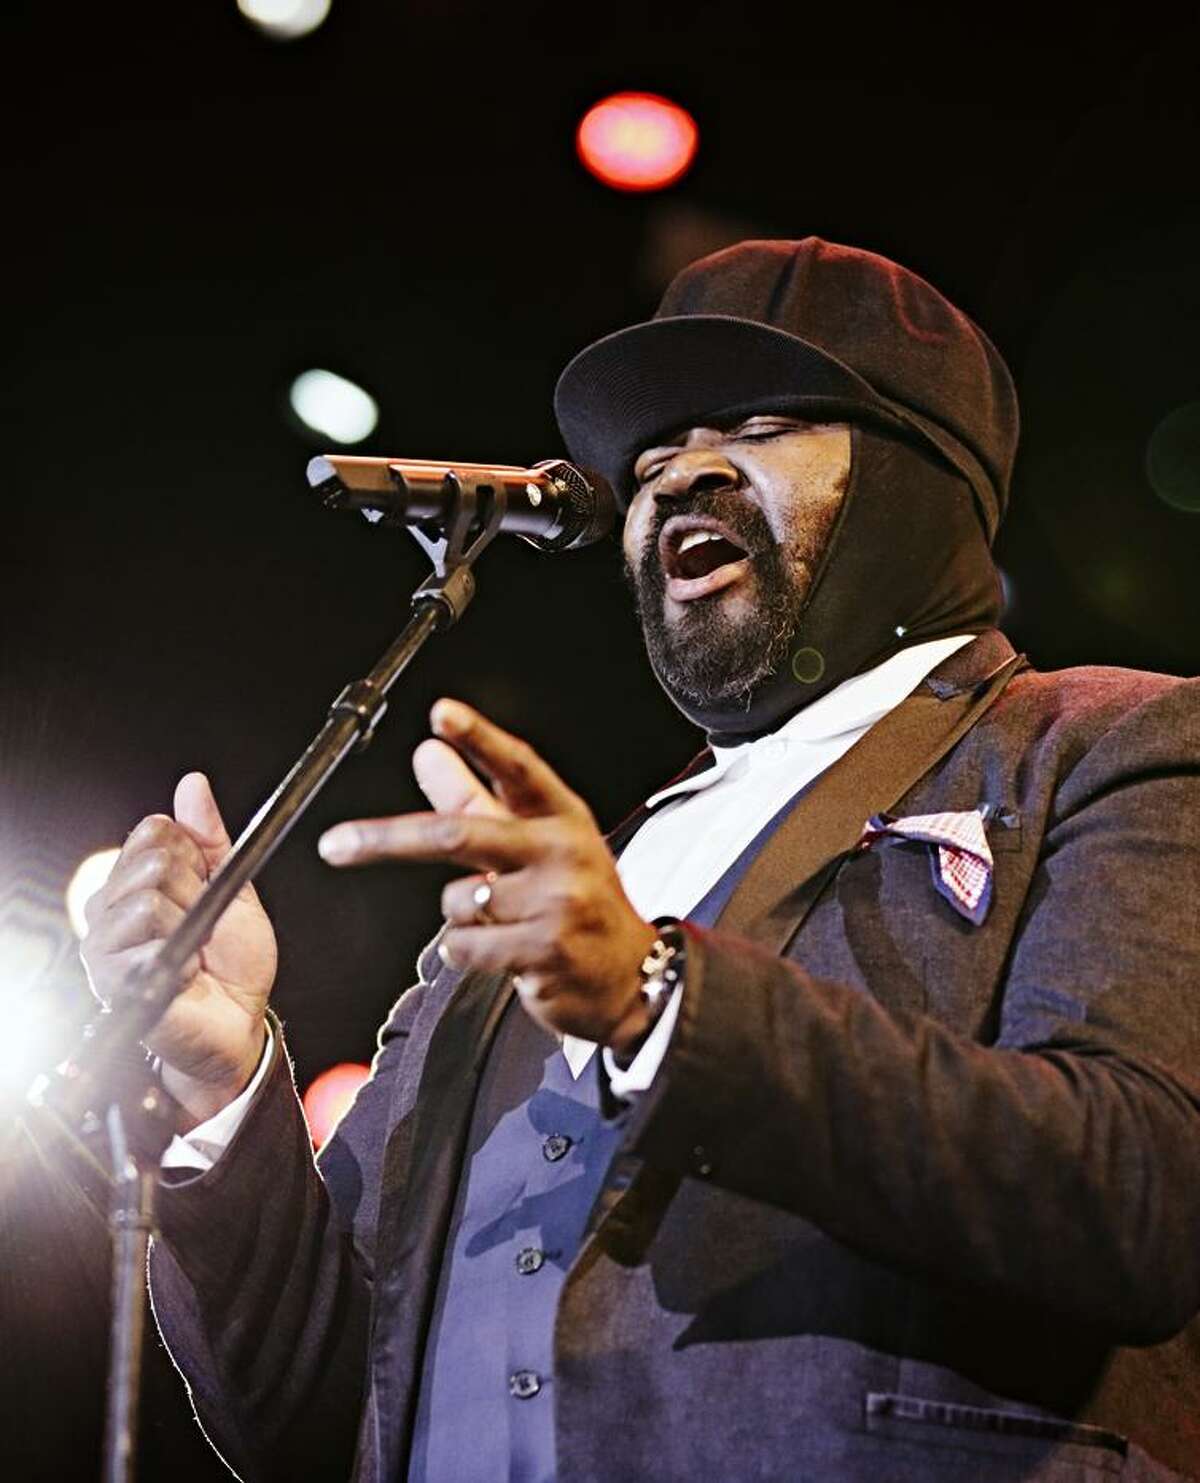 ROTTERDAM, NETHERLANDS - July 14: Gregory Porter performs at North Sea Jazz Festival on Juli 14th, 2018 in Rotterdam, The Netherlands.